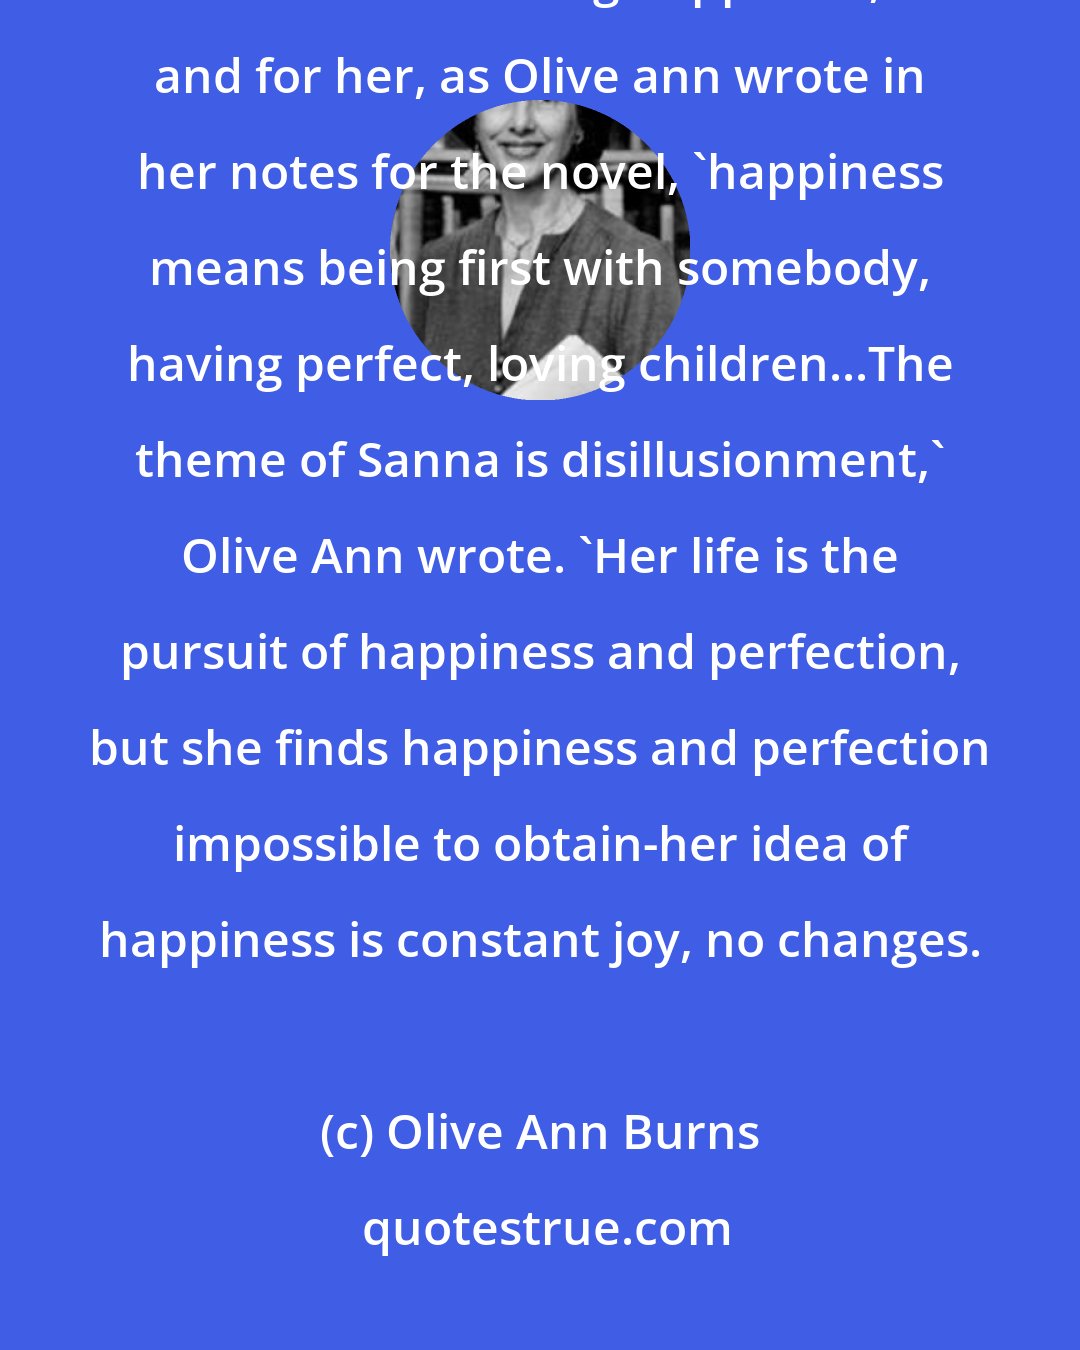 Olive Ann Burns: Olive Ann describes Sanna as 'a perfectionist and a worrier.' She is obsessed with the idea of finding happiness, and for her, as Olive ann wrote in her notes for the novel, 'happiness means being first with somebody, having perfect, loving children...The theme of Sanna is disillusionment,' Olive Ann wrote. 'Her life is the pursuit of happiness and perfection, but she finds happiness and perfection impossible to obtain-her idea of happiness is constant joy, no changes.